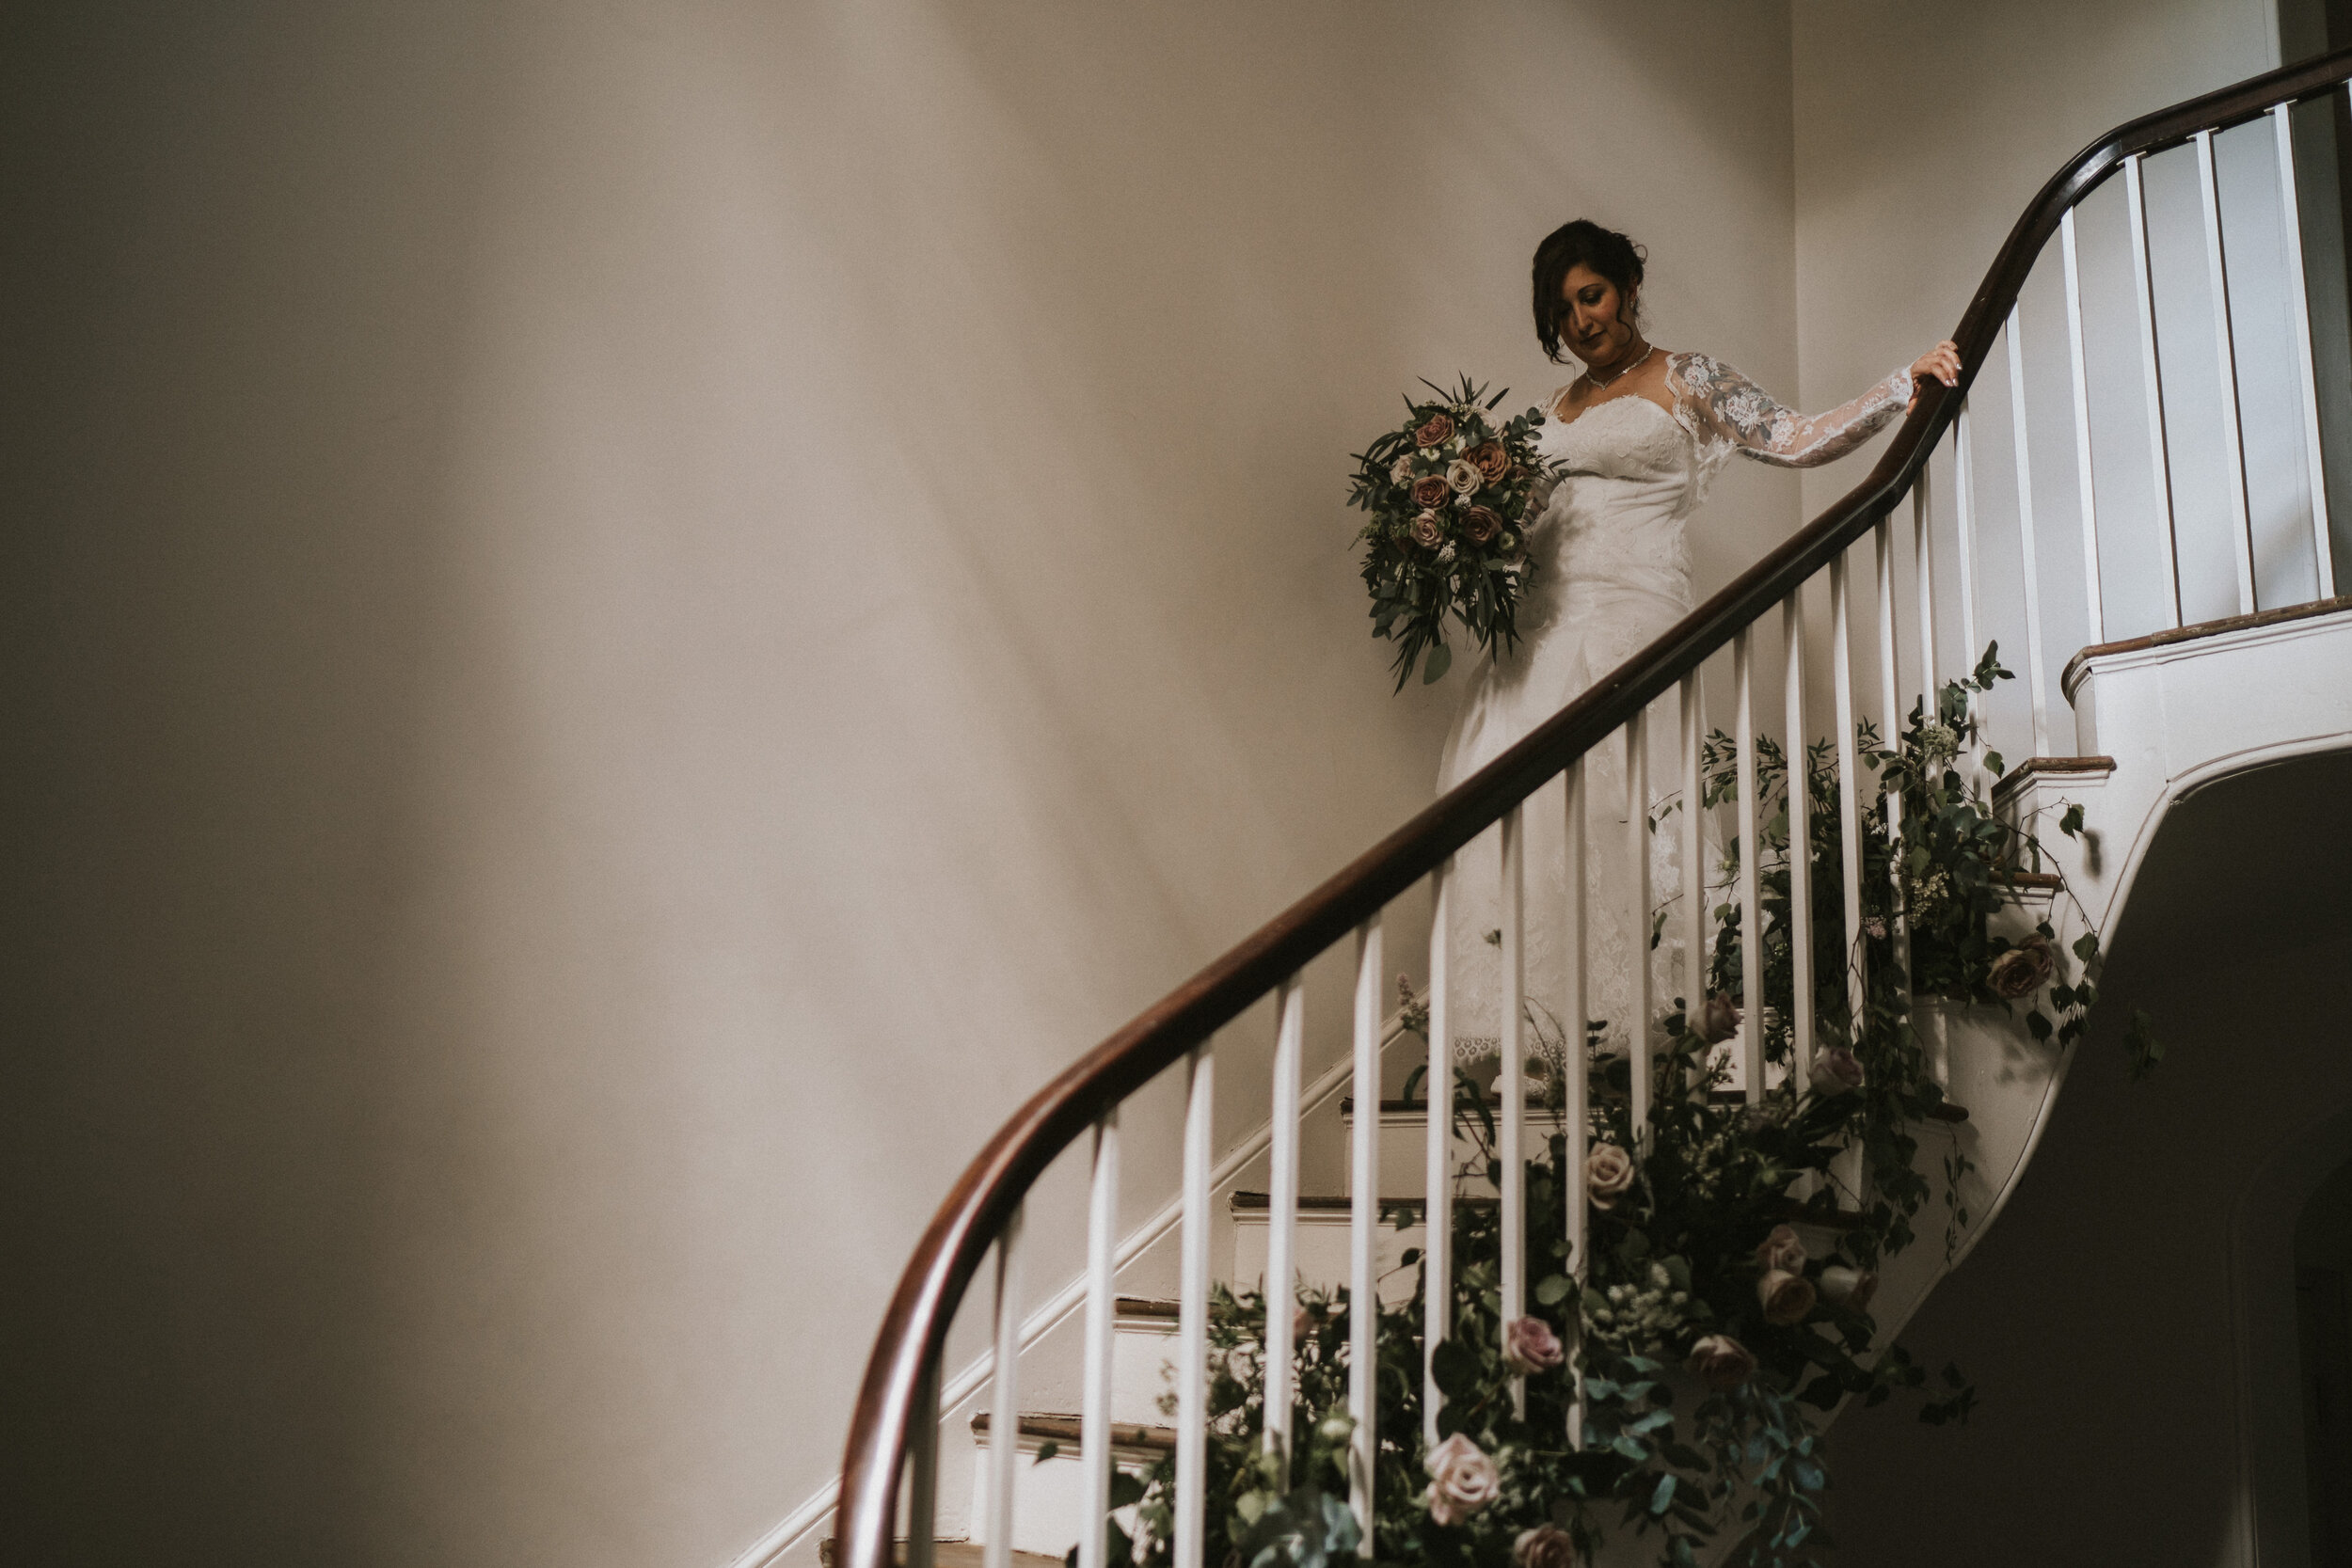  Bride descending the stair before the wedding ceremony at Aswarby Rectory, Sleaford. Wedding flowers by All Bunched Up. 